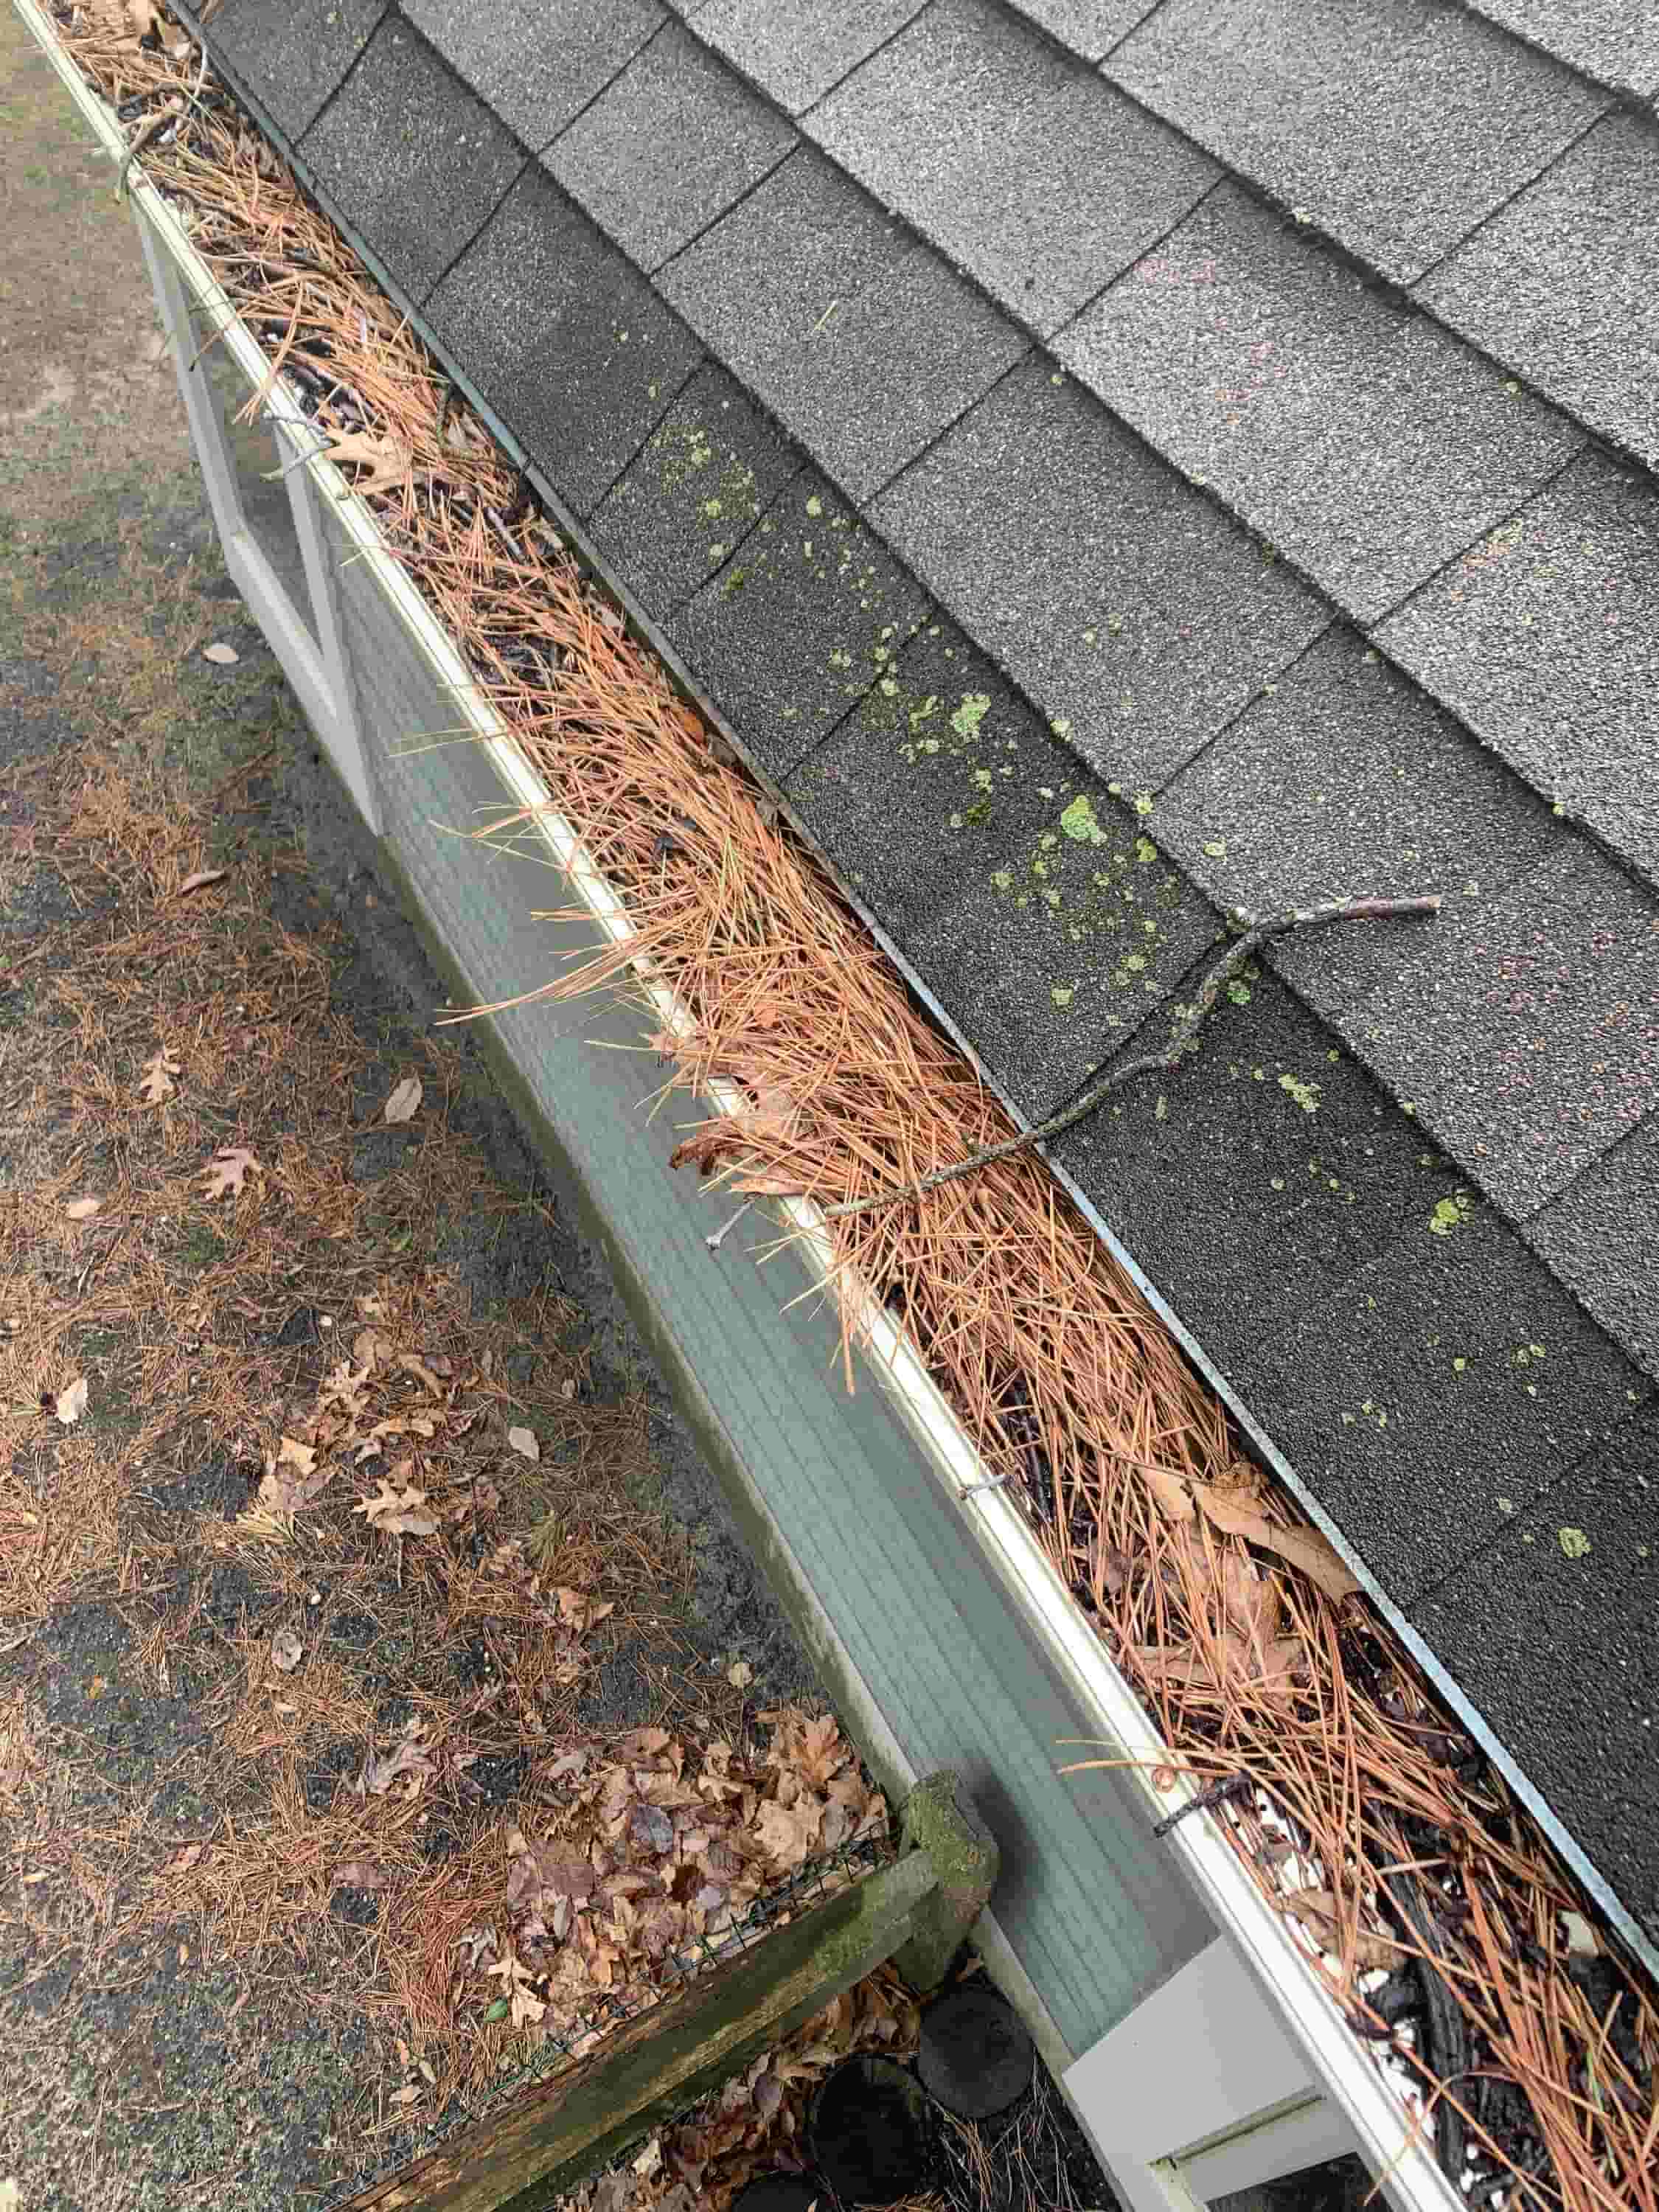 how to start a gutter cleaning business